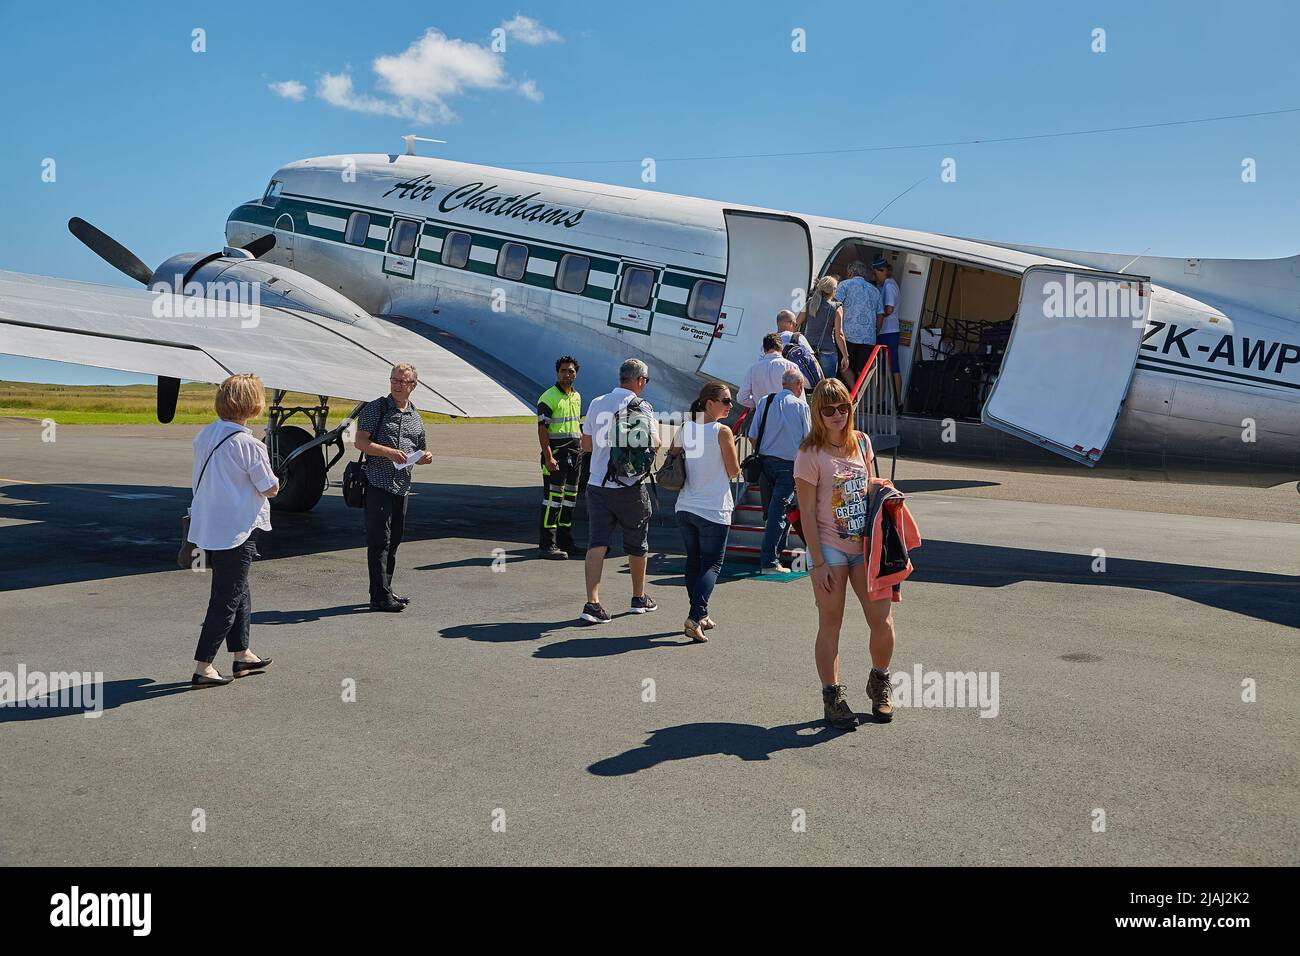 DC-3 at the airport, passangers boarding Stock Photo